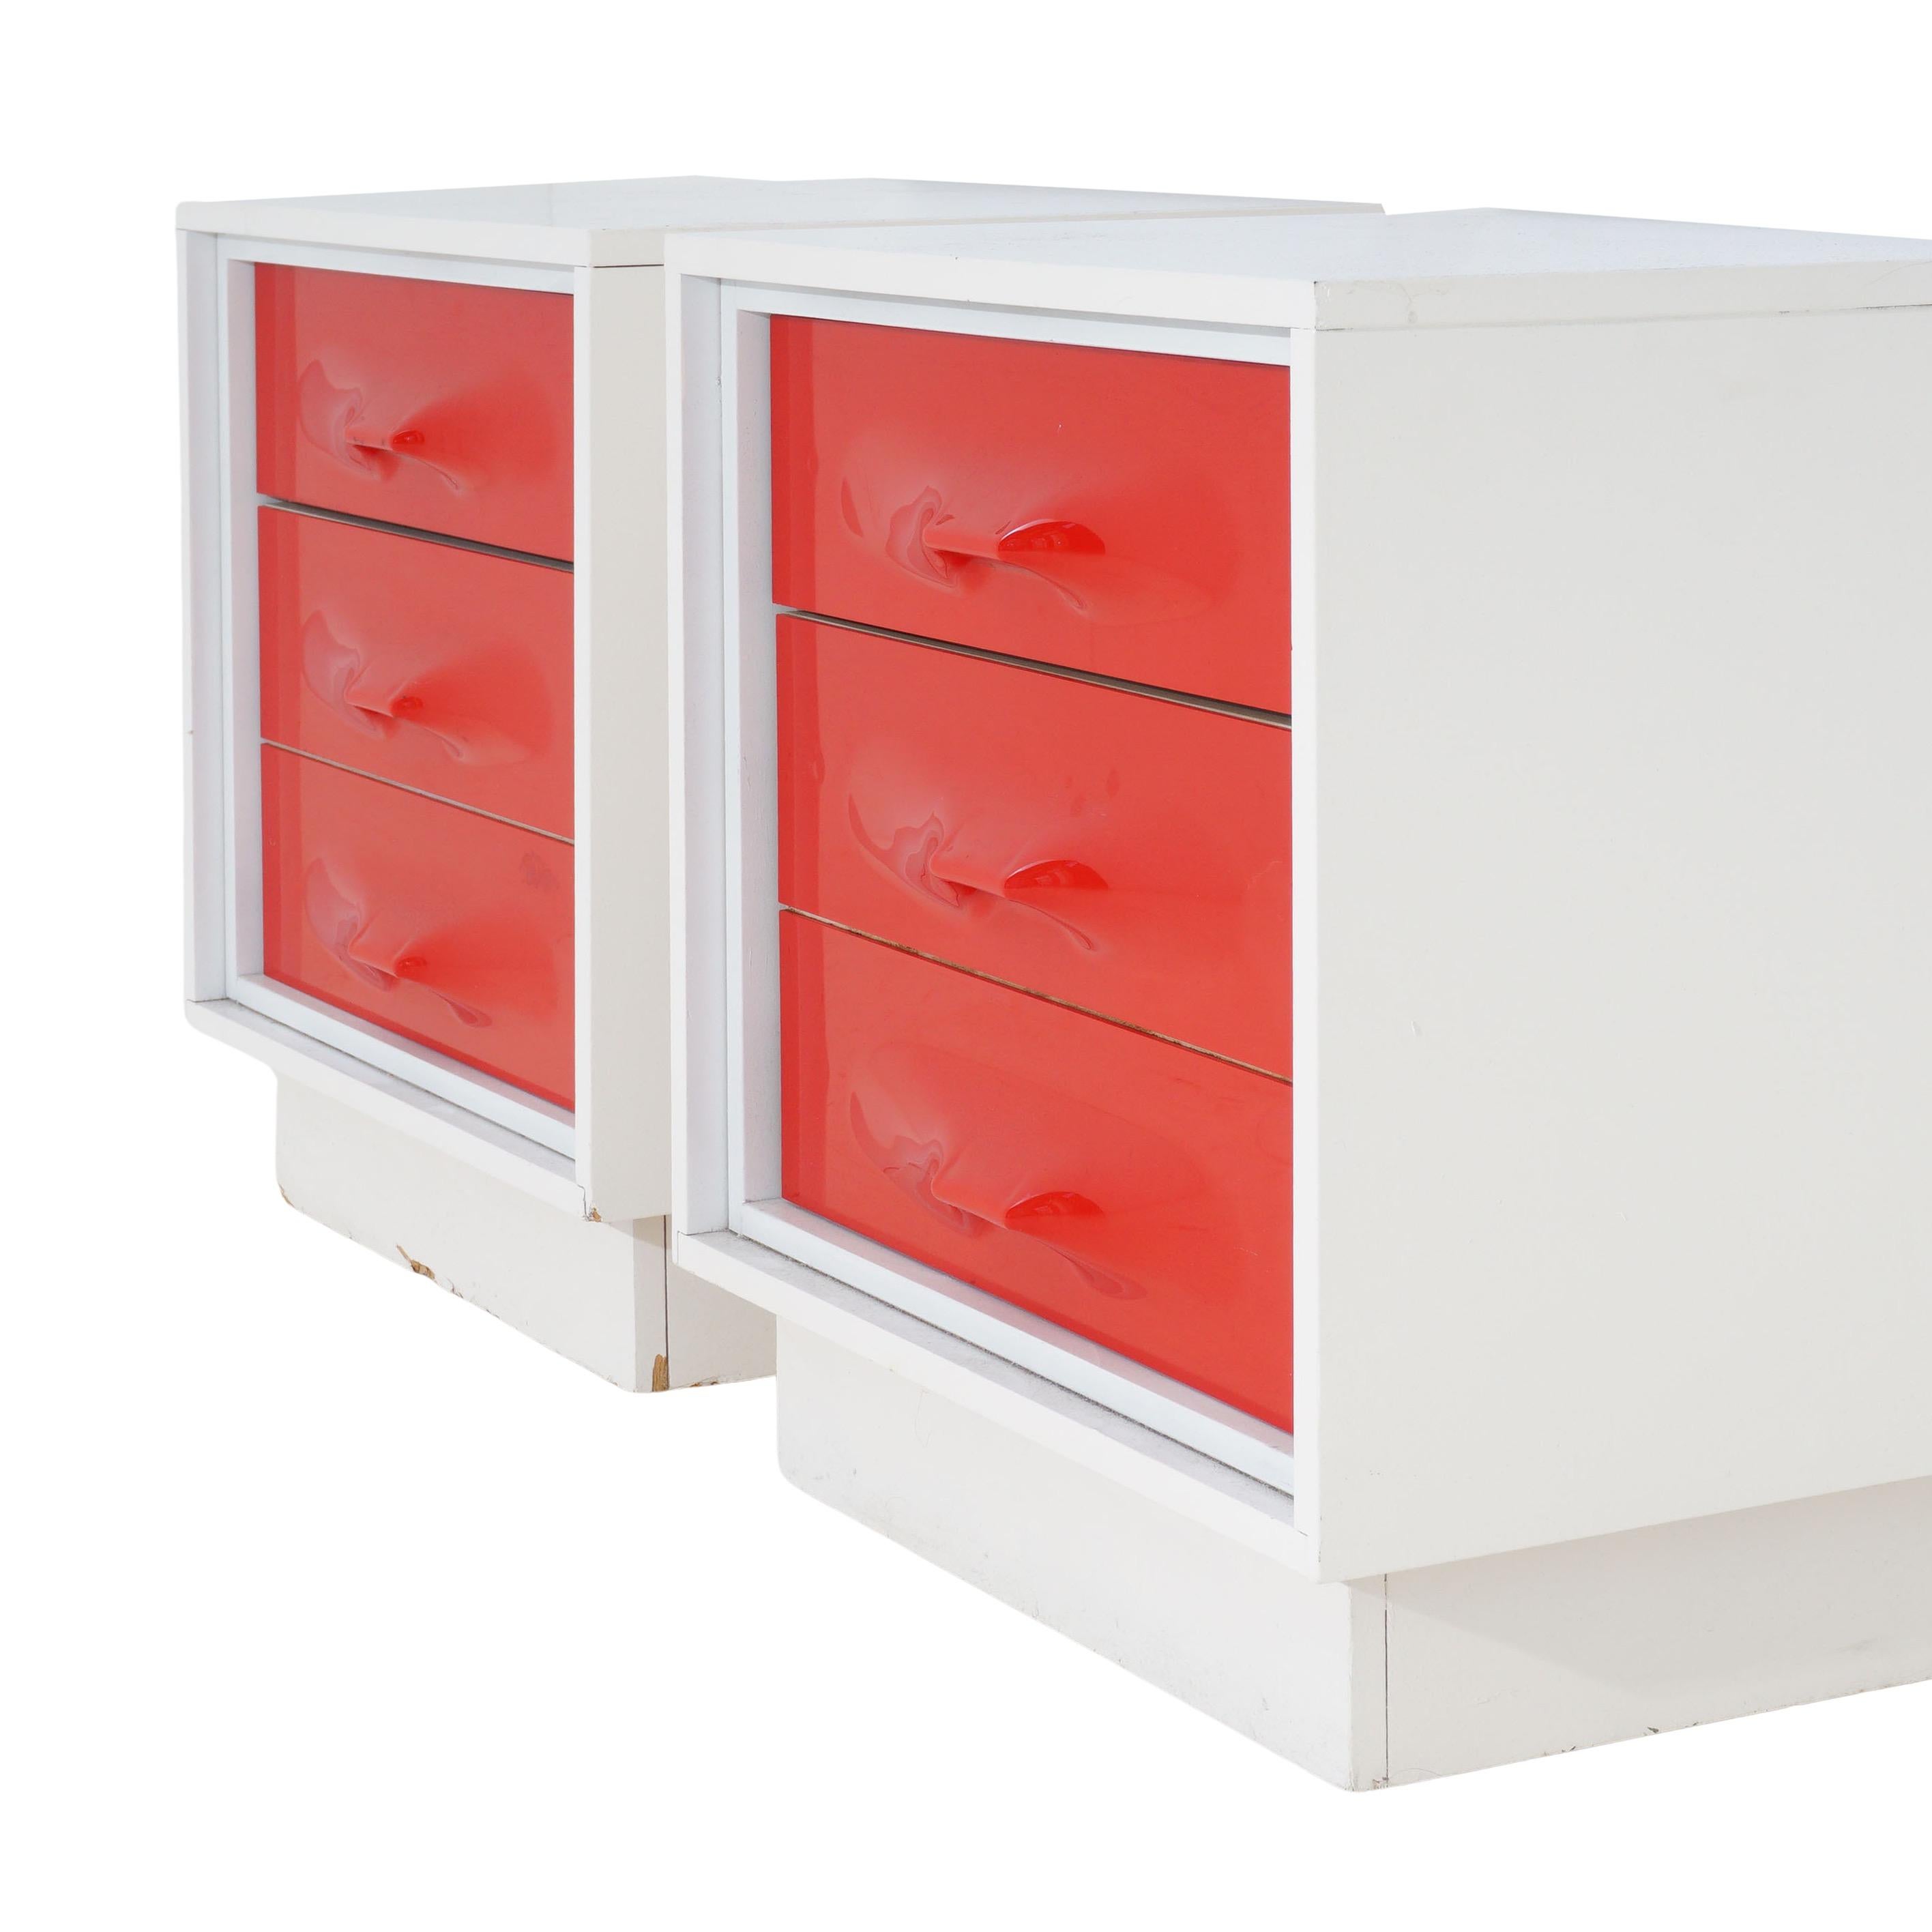 Add a touch of retro-futurism to your bedroom with these Space Age nightstands by Giovanni Maur, featuring bold red color and sleek design that blends mid-century charm with a futuristic twist.

Giovanni Maur is a visionary furniture designer known